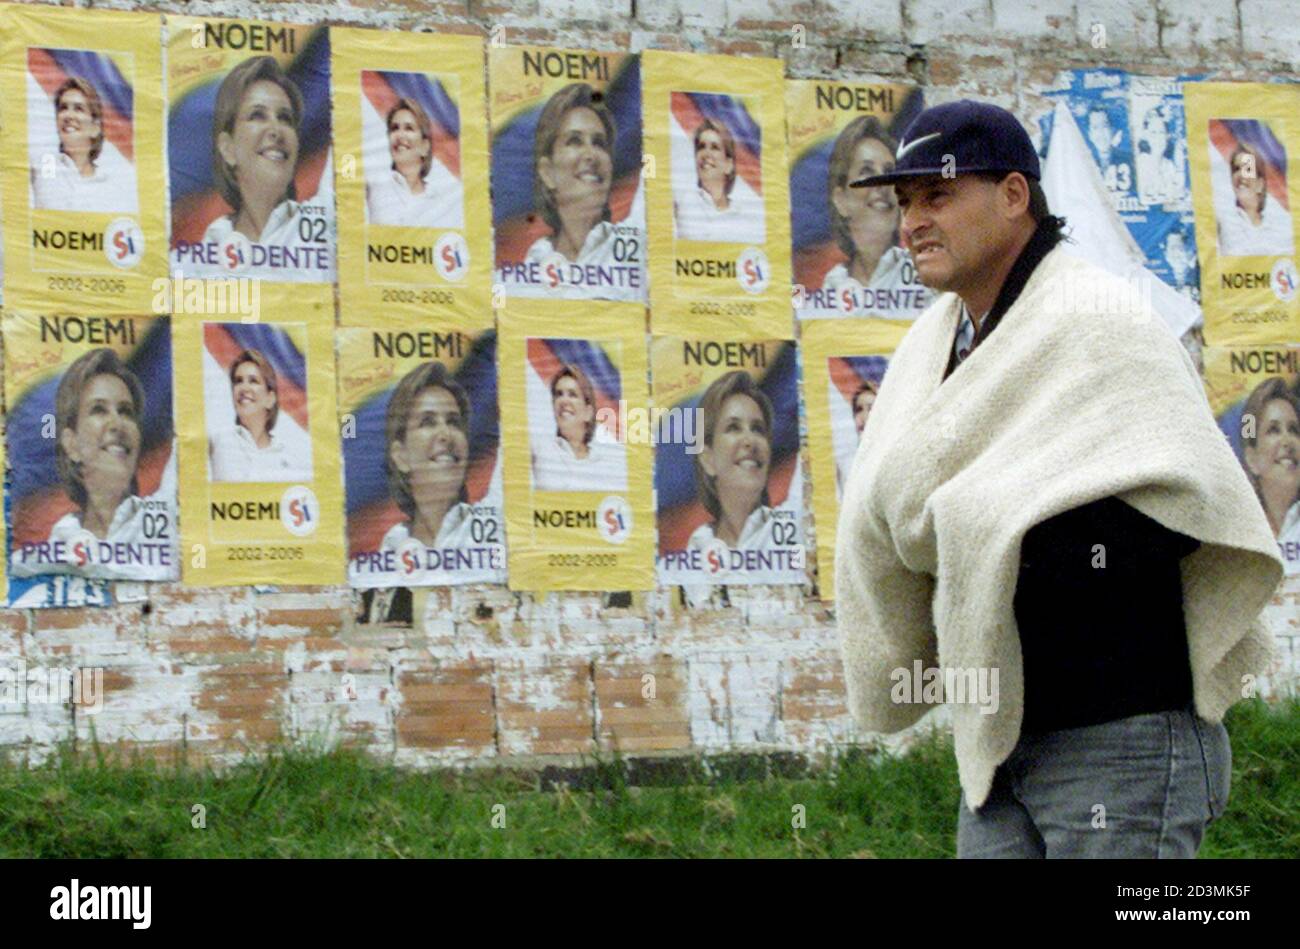 A Colombian farmer walks next to a wall with banners of Colombian presidential candidate Noemi Sanin in Guasca, near Bogota, May 21, 2002. The Colombian presidential election will be held on May 26. REUTERS/Eliana Aponte  EA/MMR Stock Photo